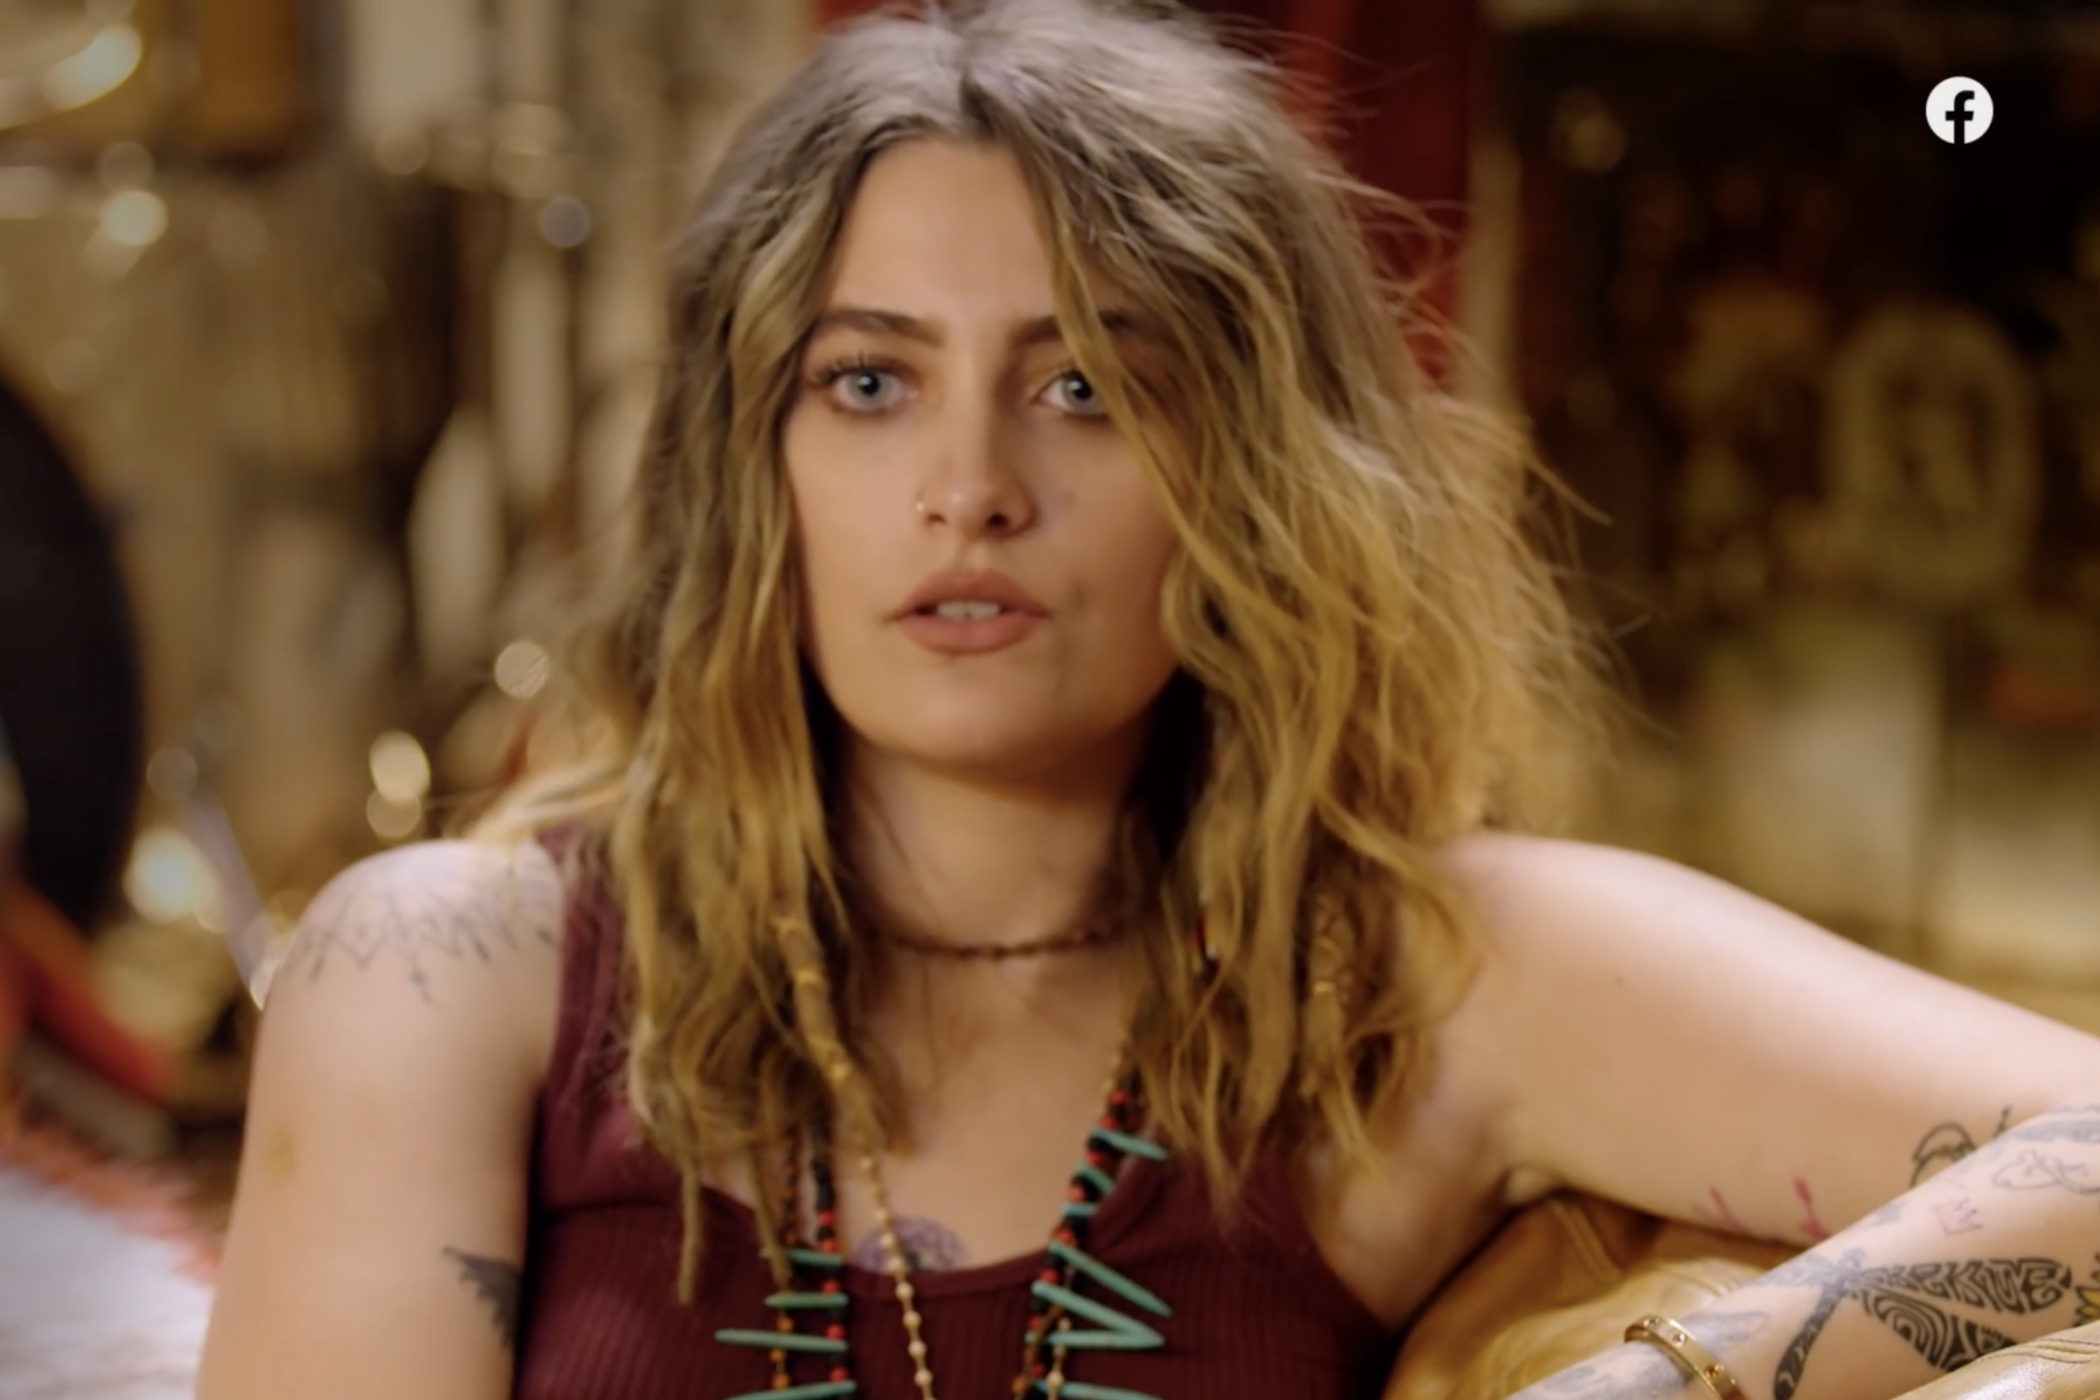 Paris Jackson has opened up about her struggles with body image and self-harm (Facebook)